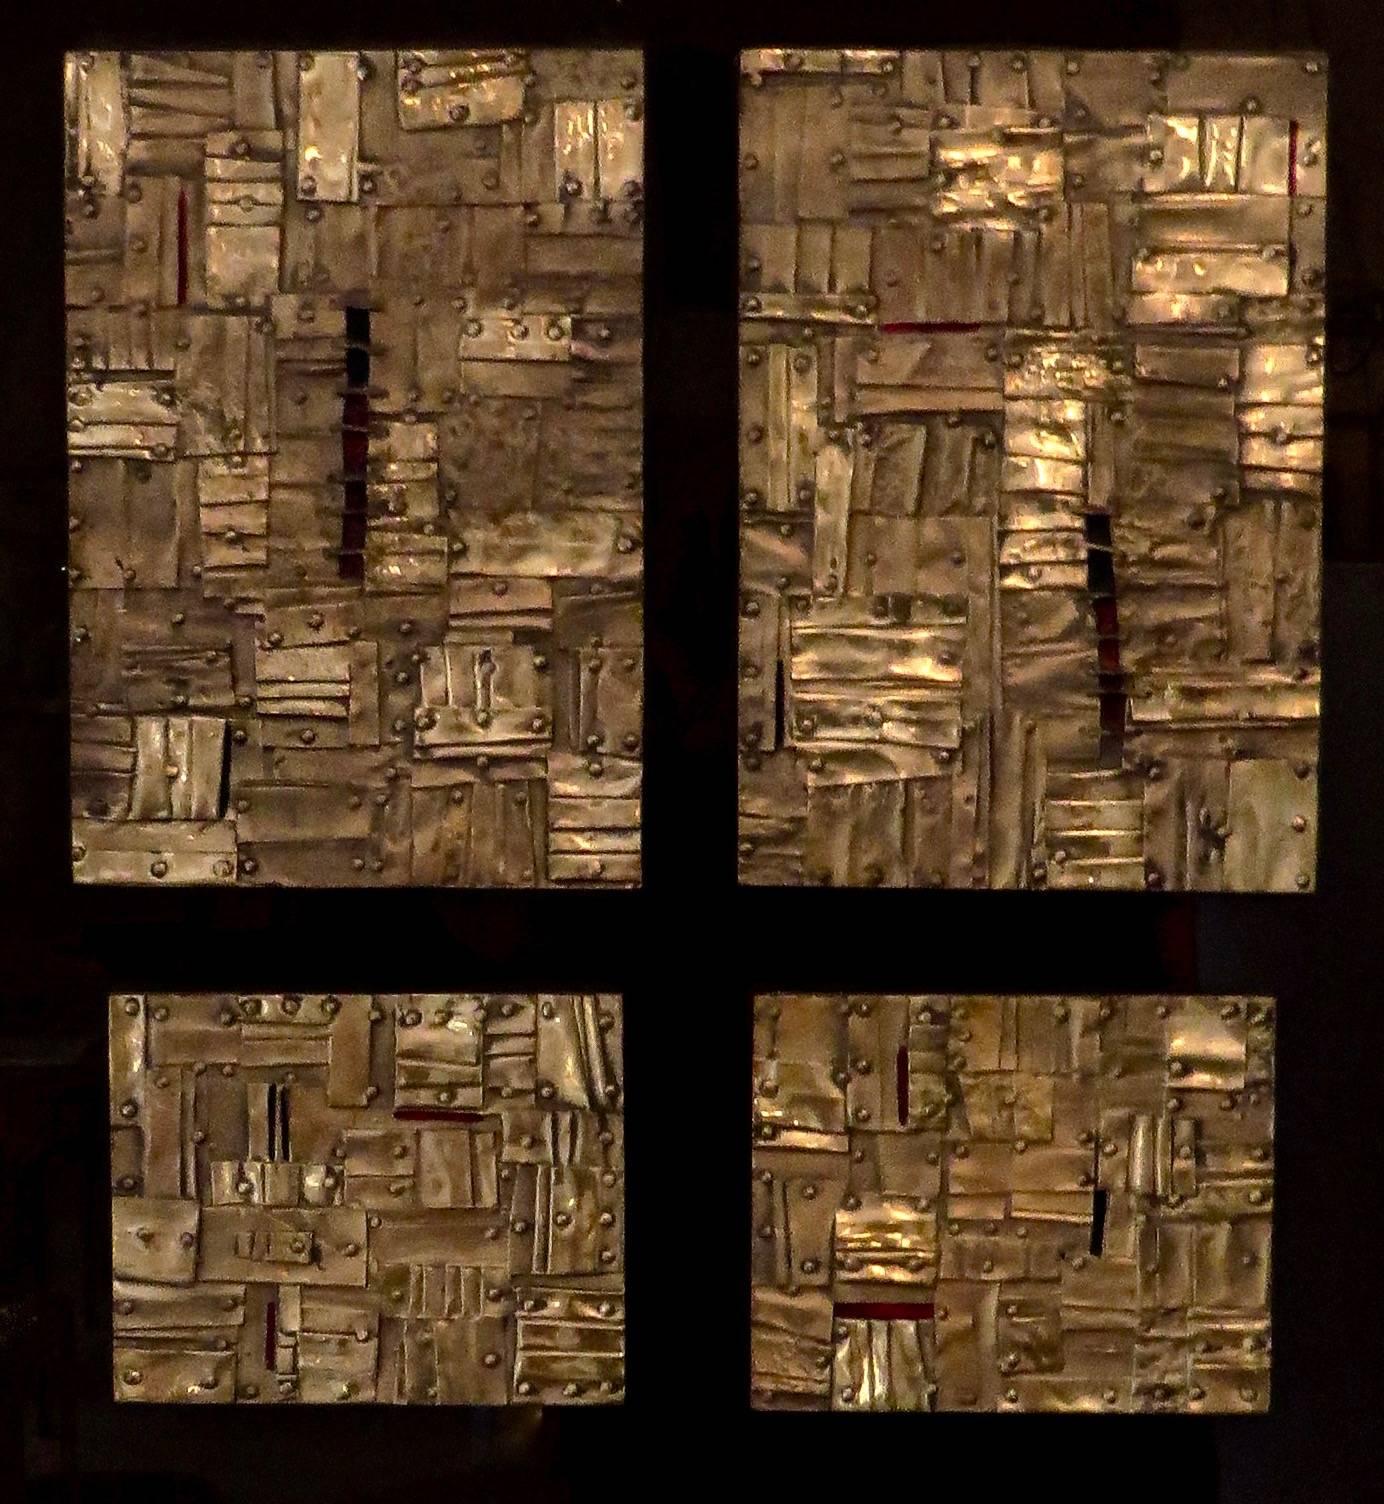 Italian artist Esa Fedrigolli signed, dated and numbered bronze, copper and enamel wall sculpture/paintings. The sculpture/painting is composed of a veritable bronze composition of small squares, rectangles and other forms with a visual stitched